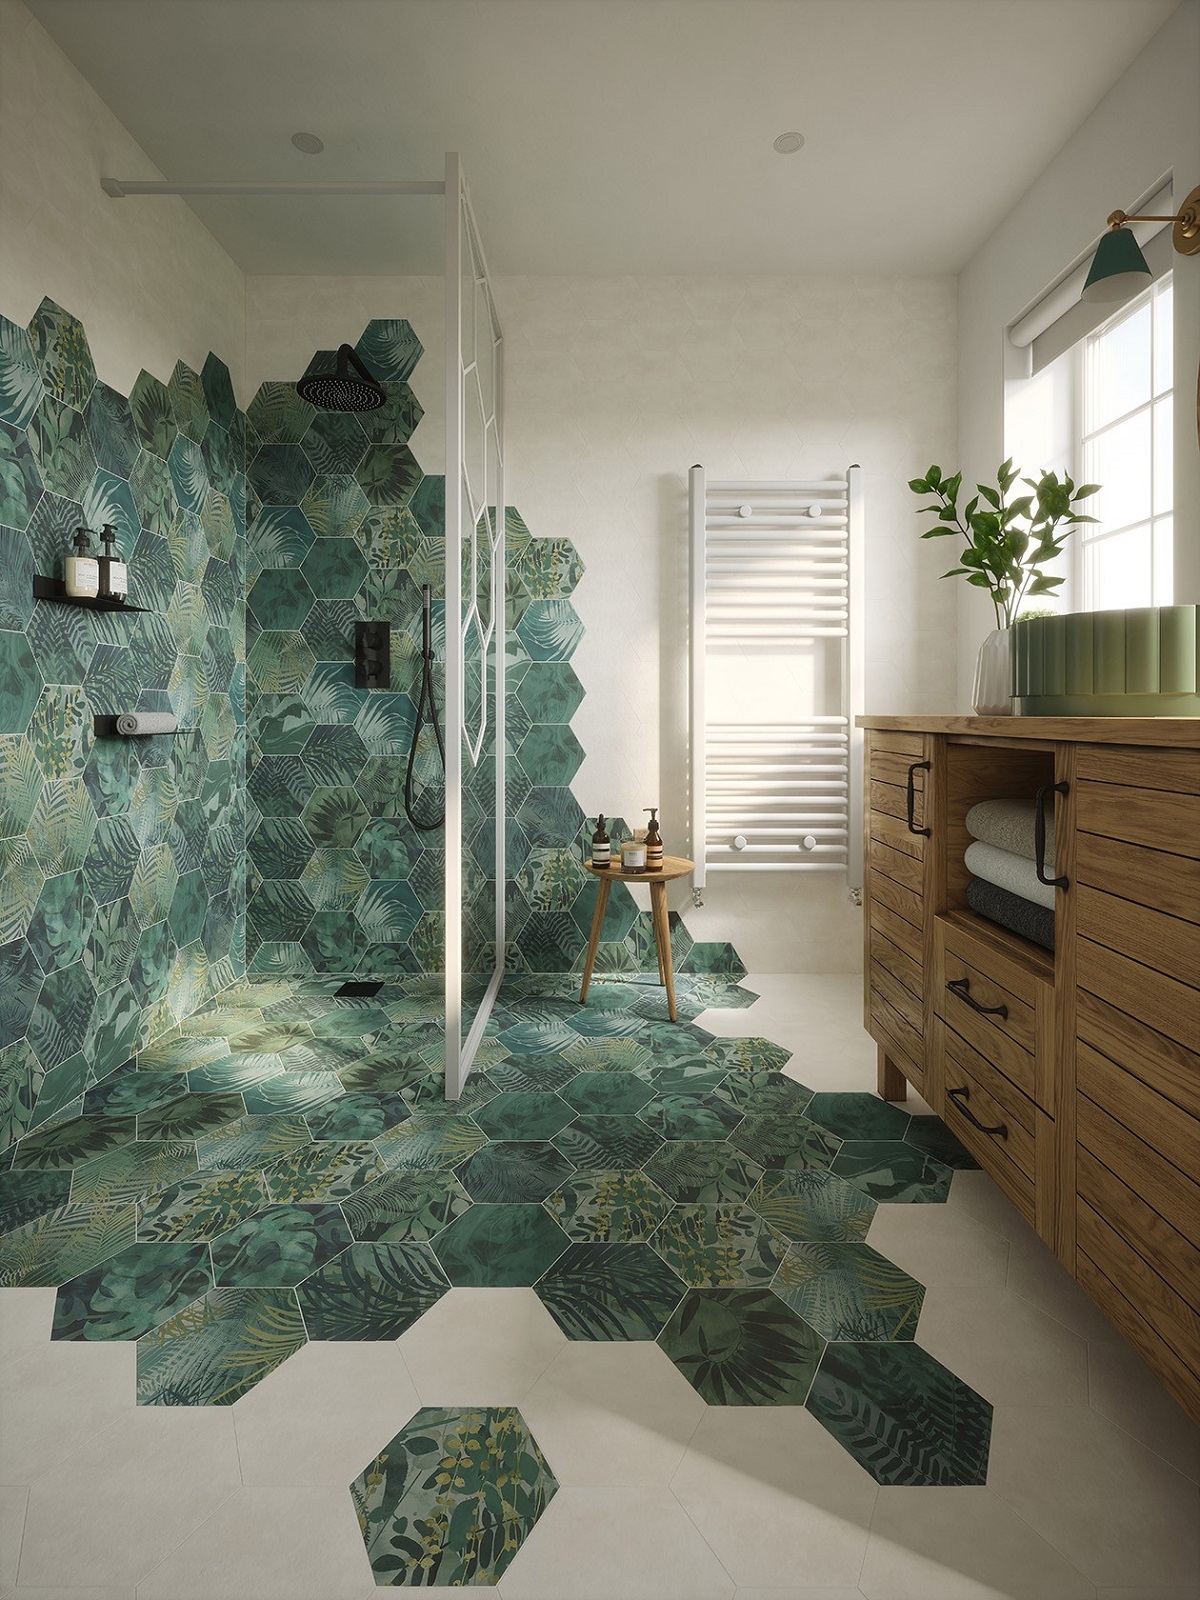 hexagon jungle tile on floor and wall in the shower